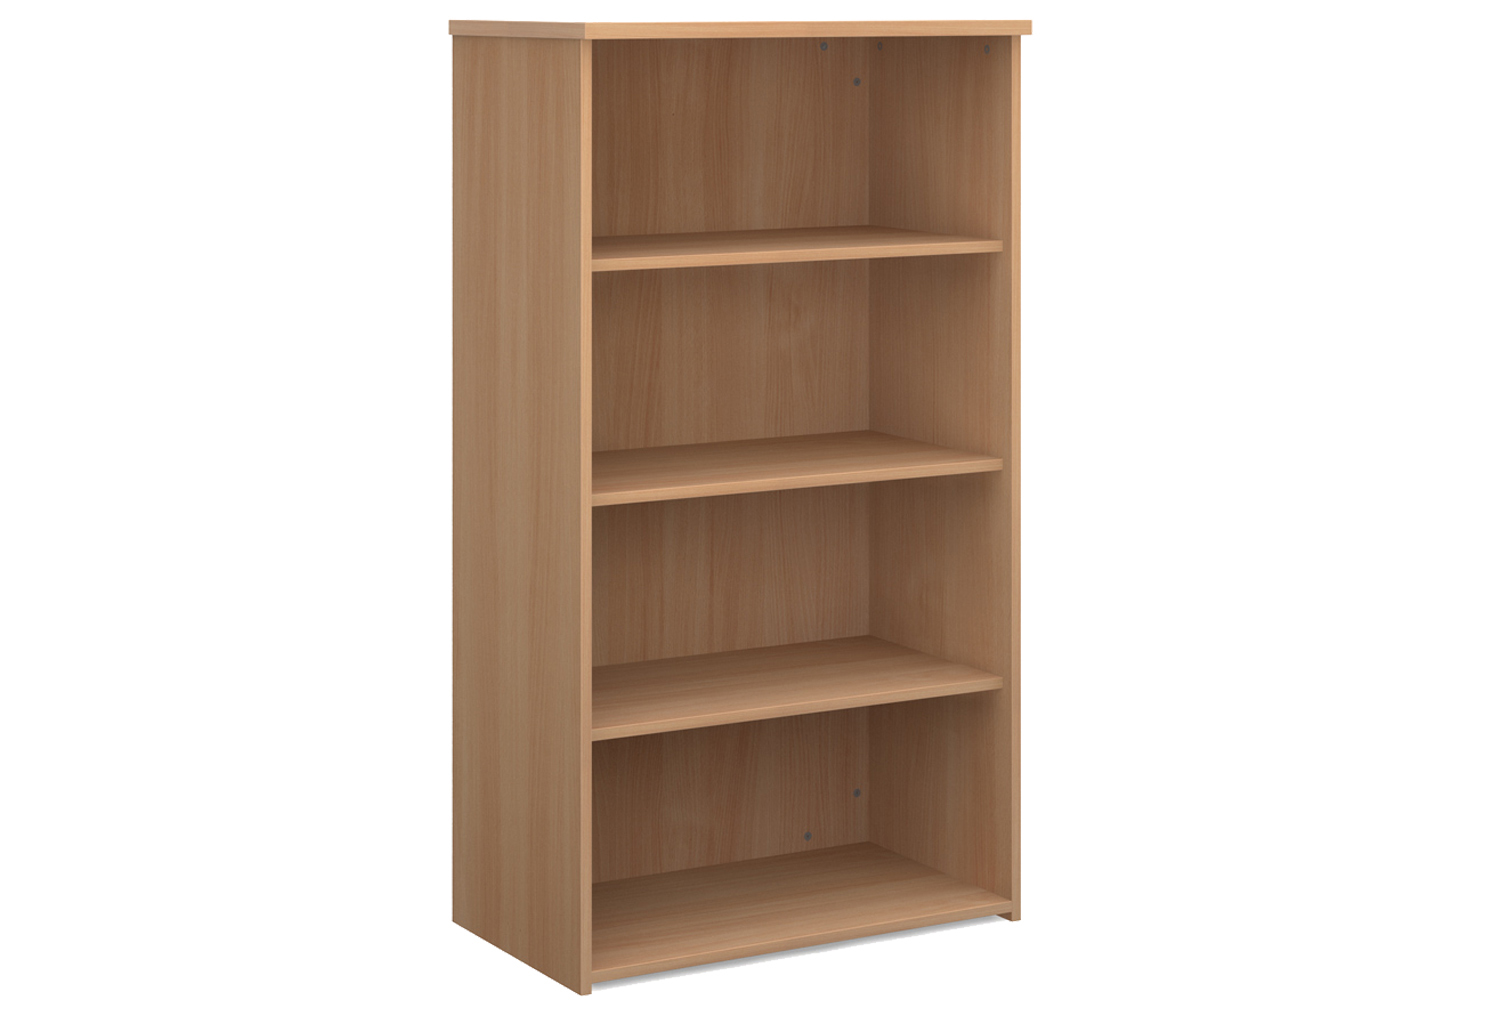 Value Line Office Bookcases, 3 Shelf - 80wx47dx144h (cm), Beech, Fully Installed